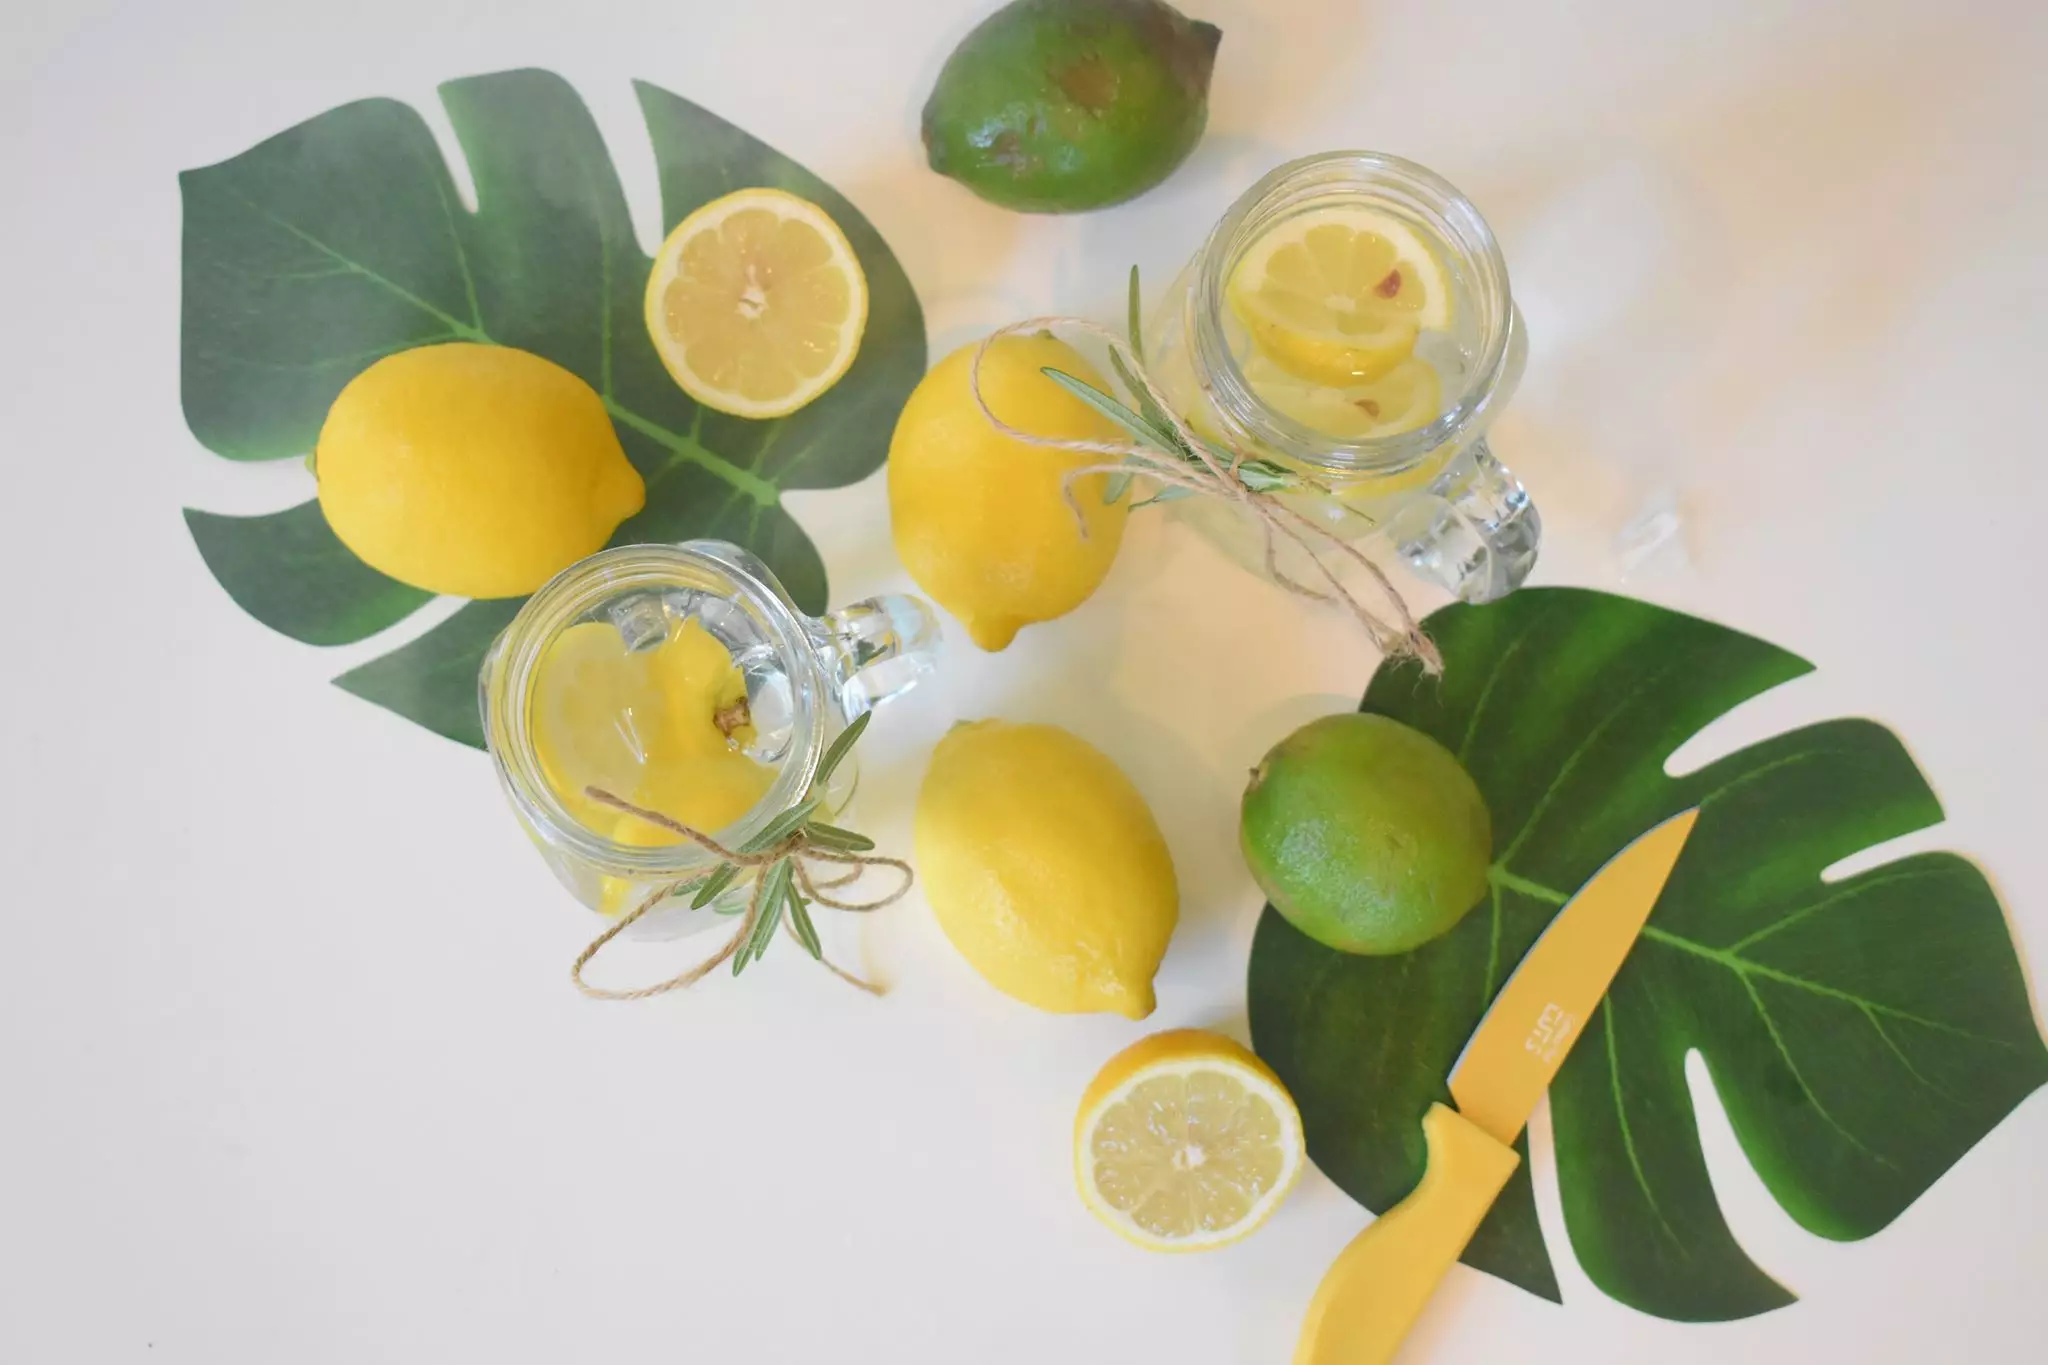 Frozen lemon and limes are easy to make (